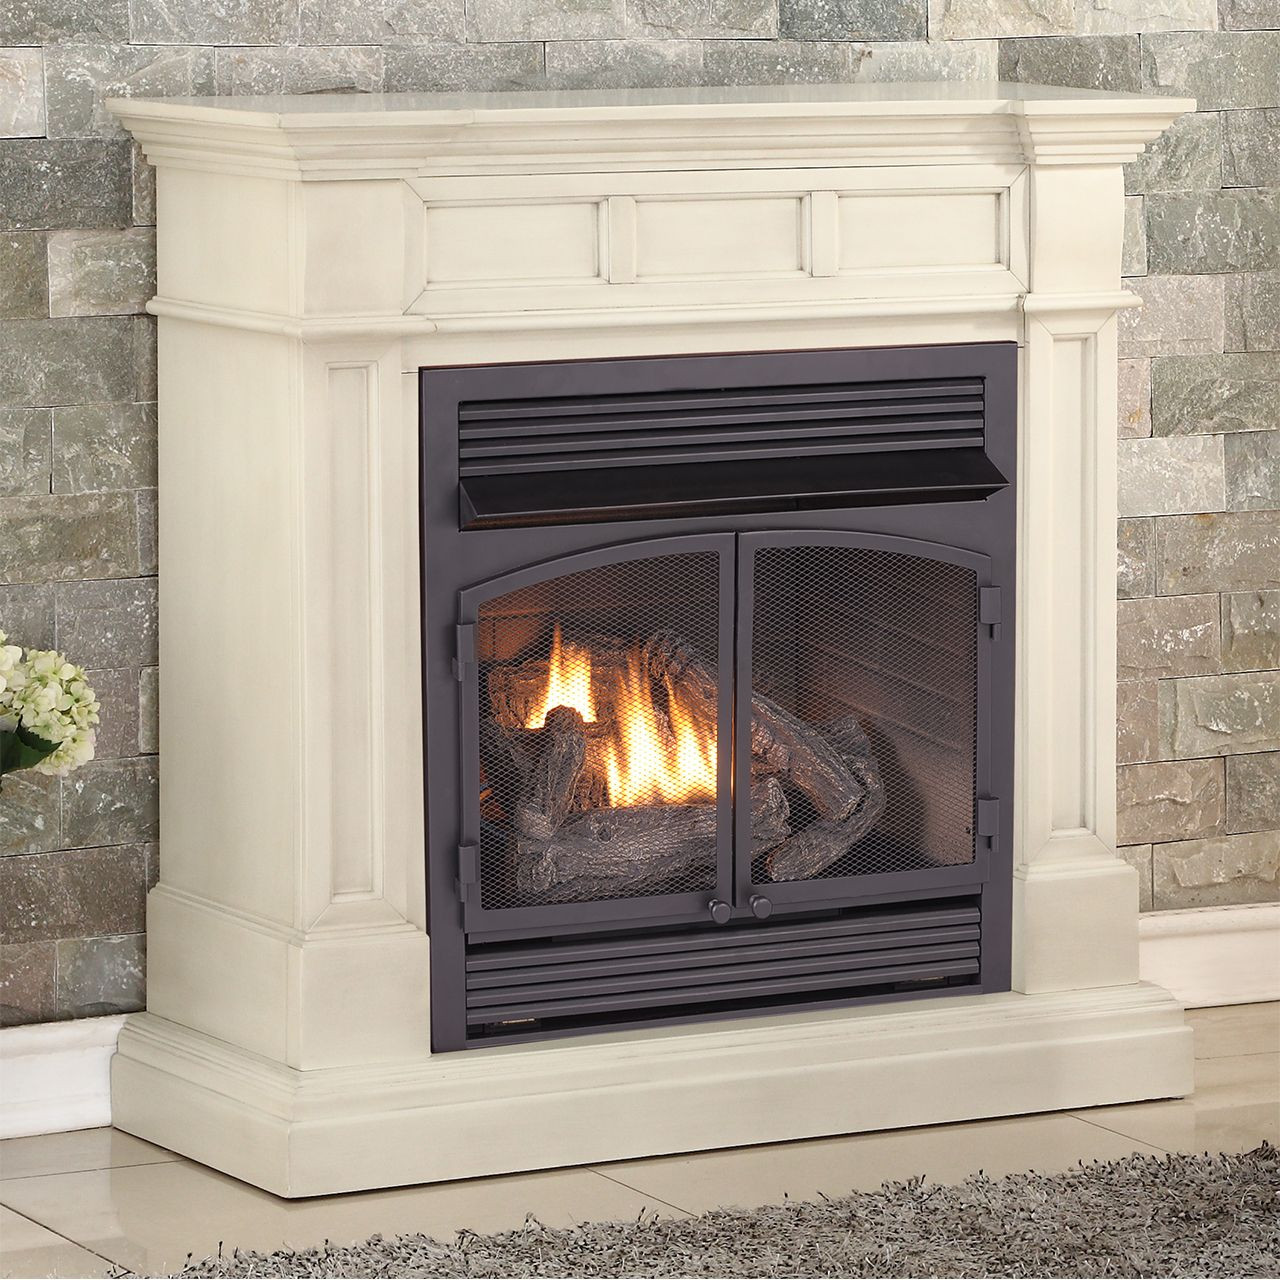 Gas Fireplaces and Gas Inserts, Waltz & Sons, Inc.